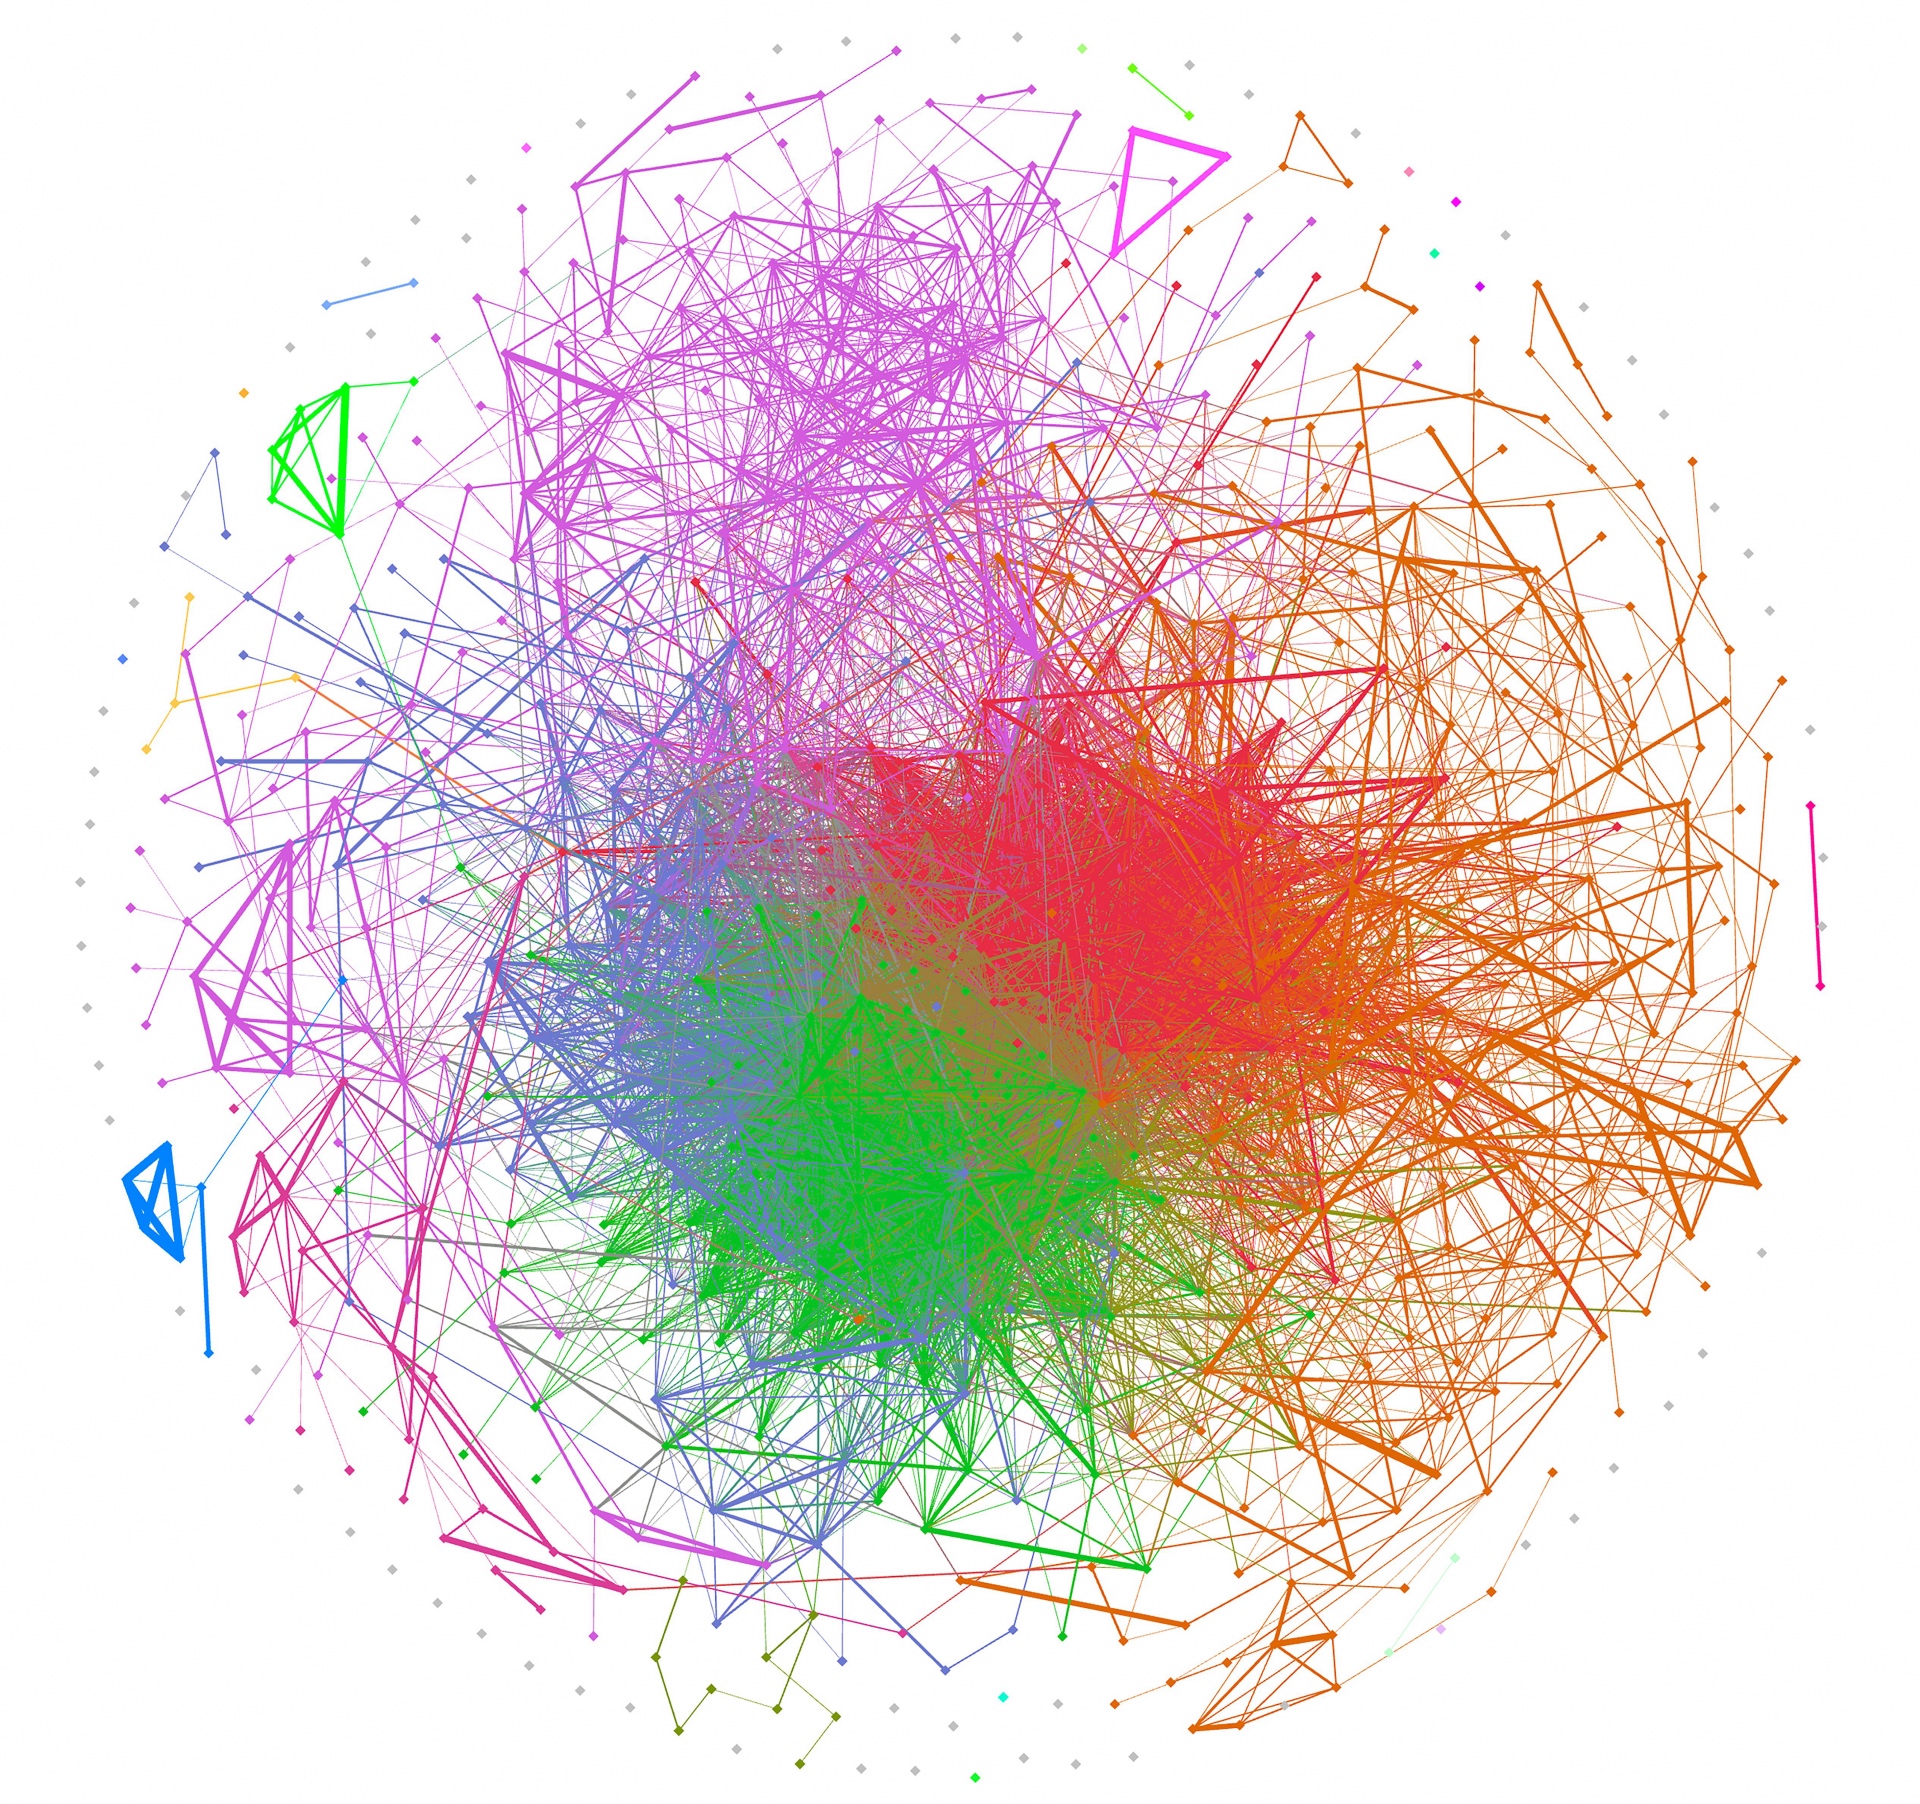 data visualization art of colorful points and lines that form a sphere